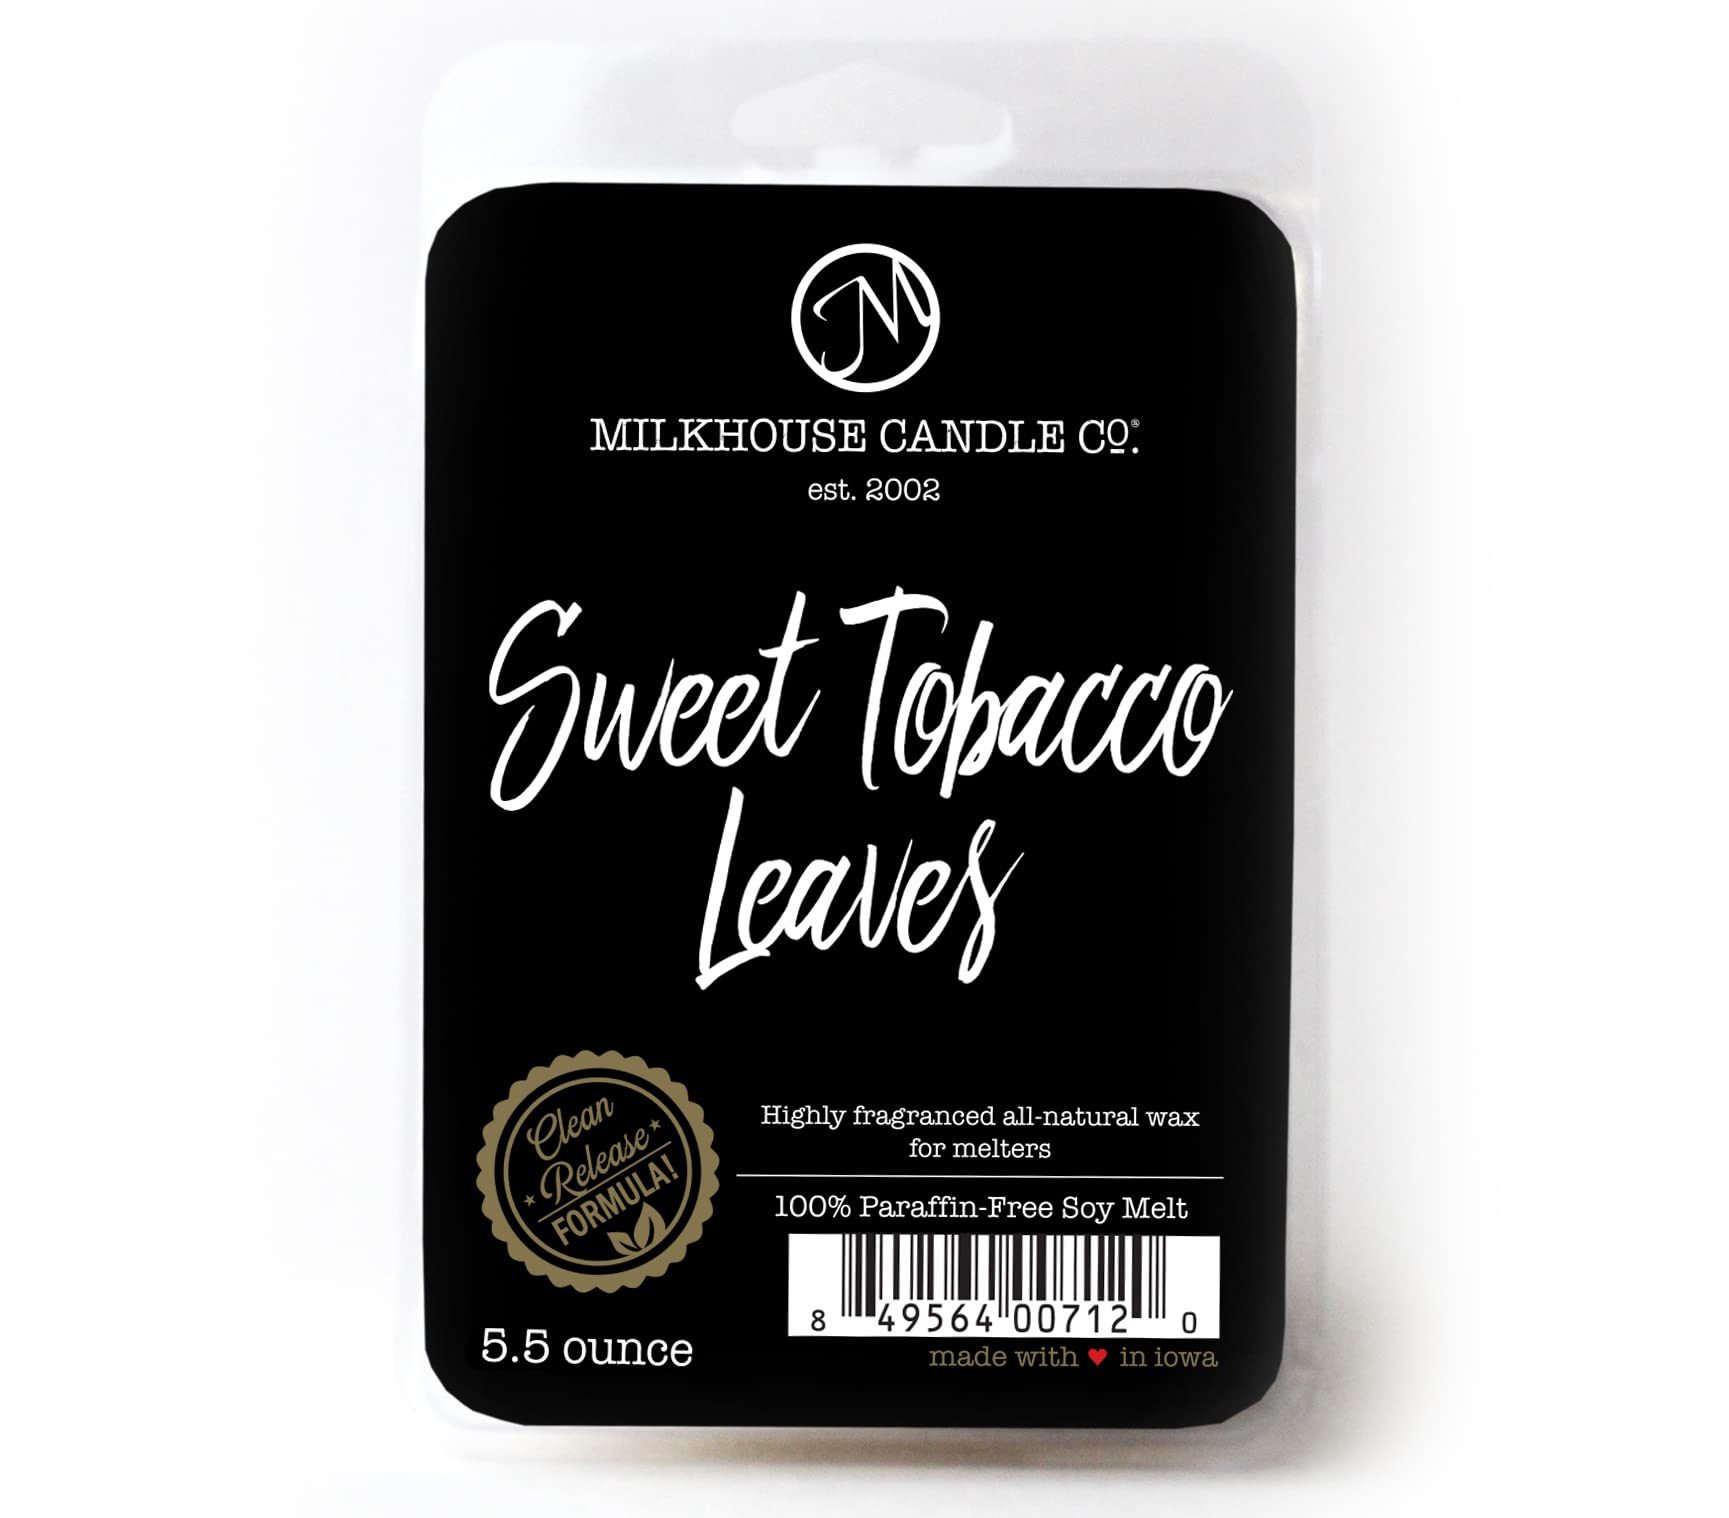 Milkhouse Candle Company, Sweet Tobacco Leaves, Creamery